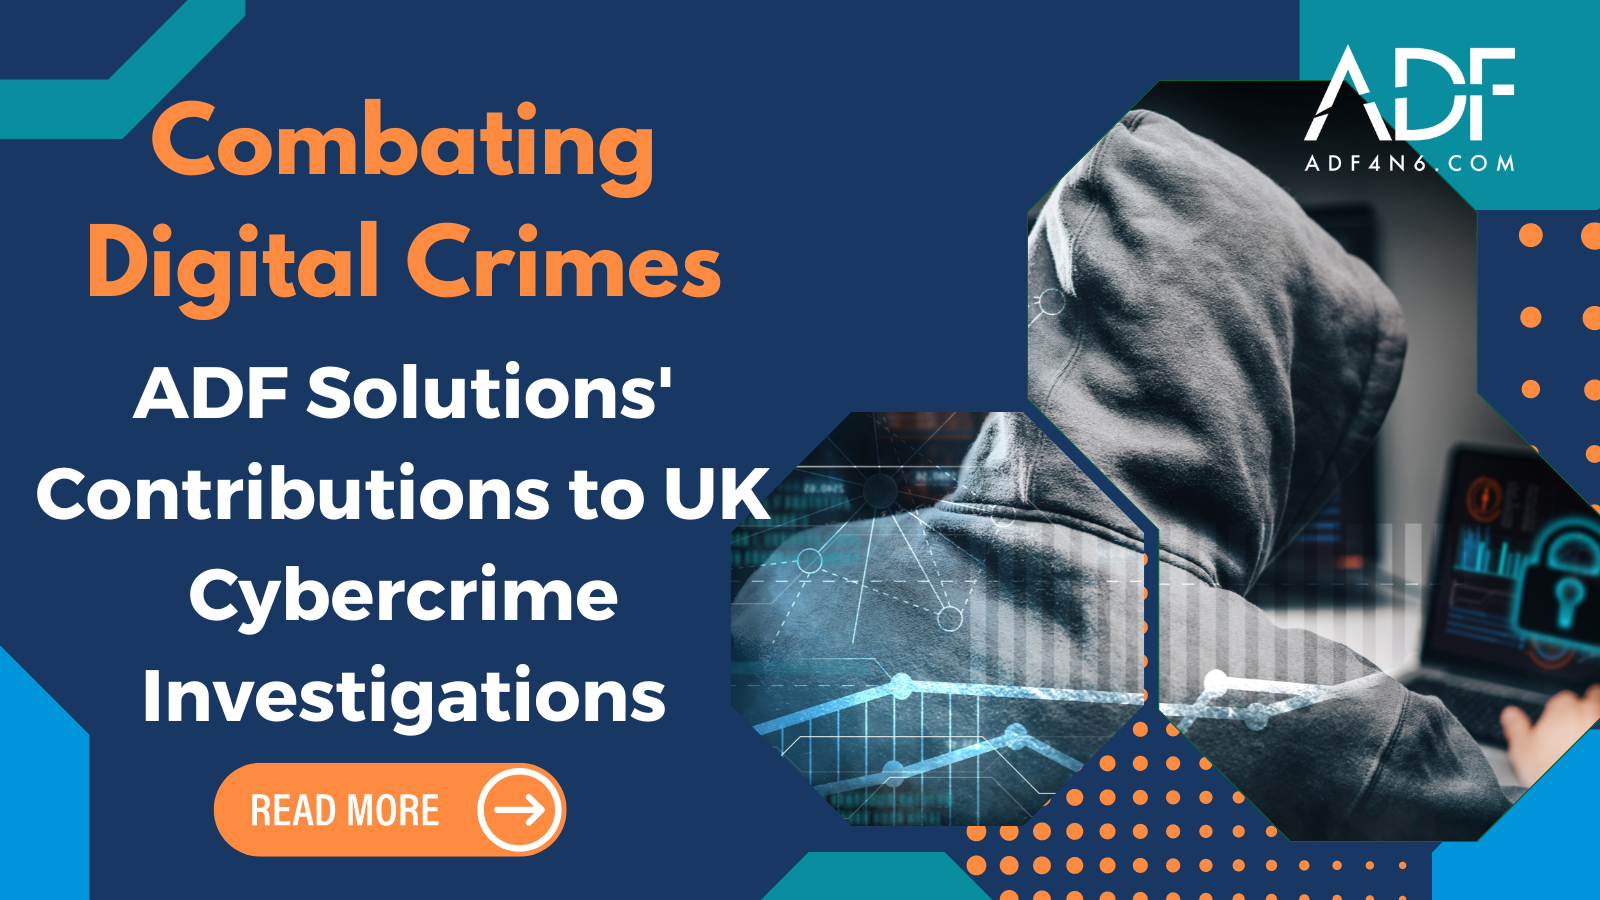 ADF Solutions' Contributions to UK Cybercrime Investigations